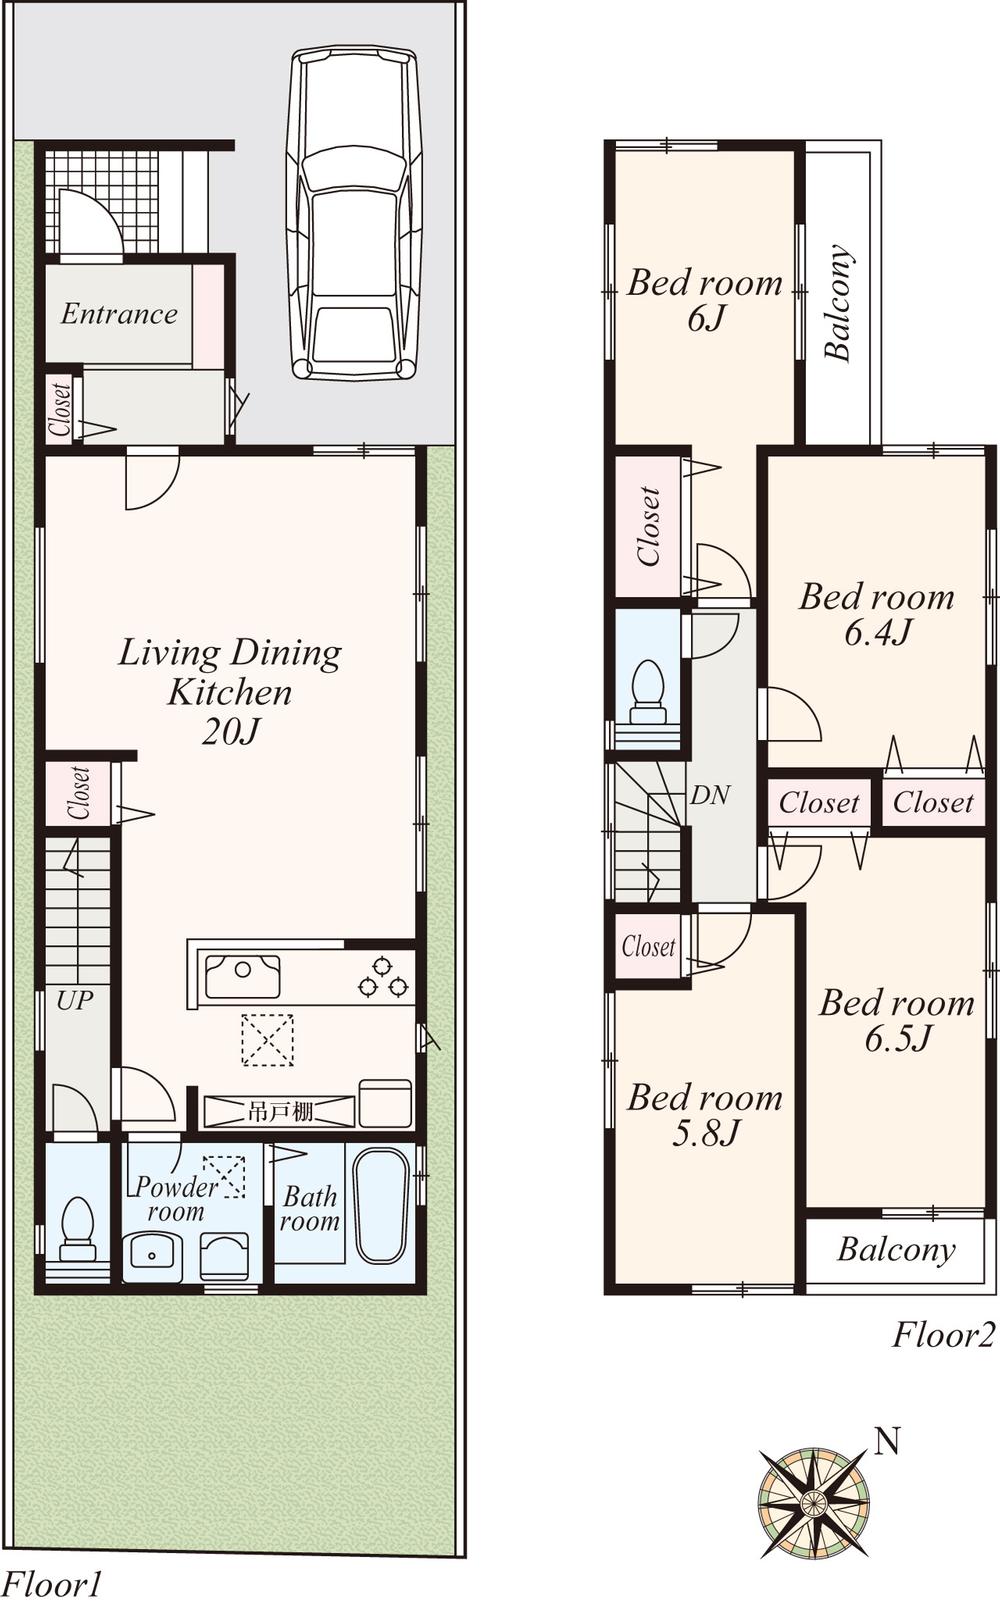 Floor plan. Finally 36 House of streets is completed. It offers also serves as the perfect living environment to the child-rearing! For more information, please contact us.